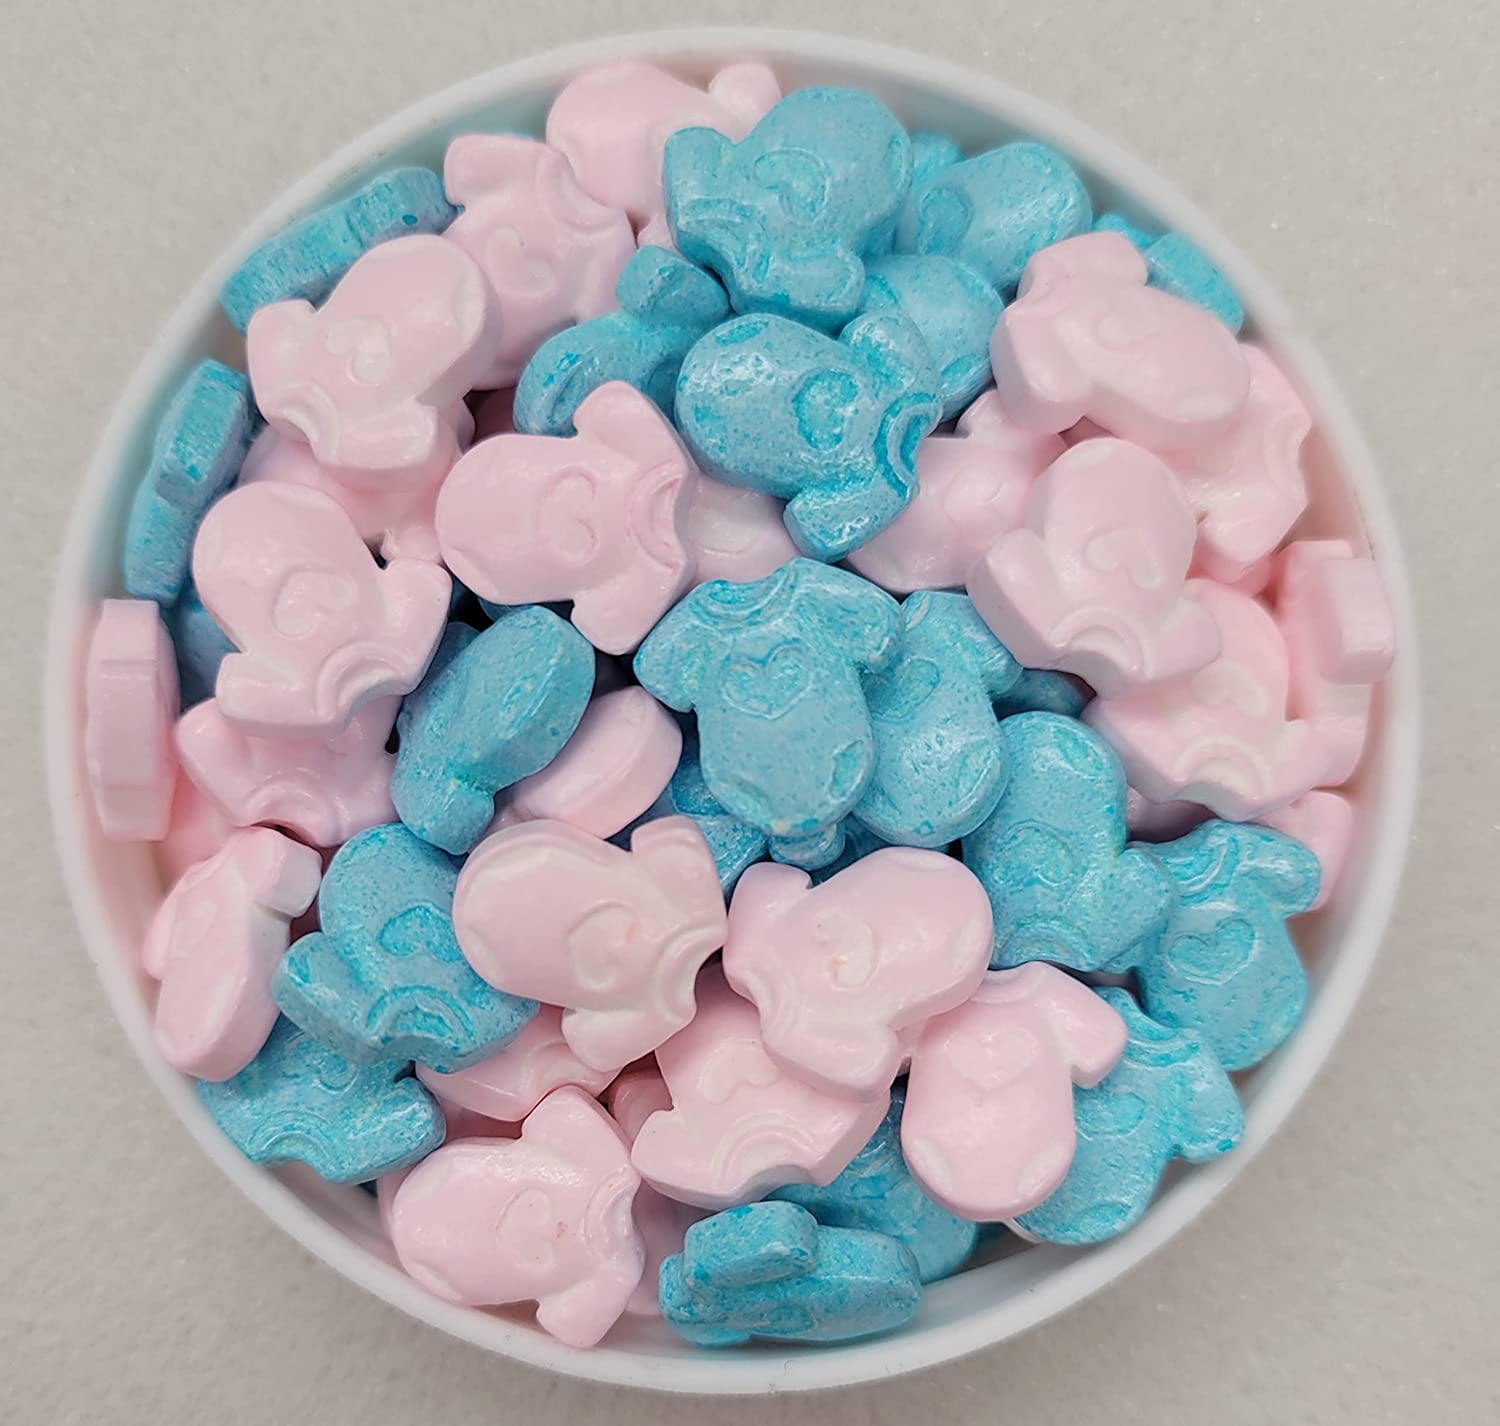 New Baby/Baby Shower Blue Confetti Sprinkles with Plastic Dummies 